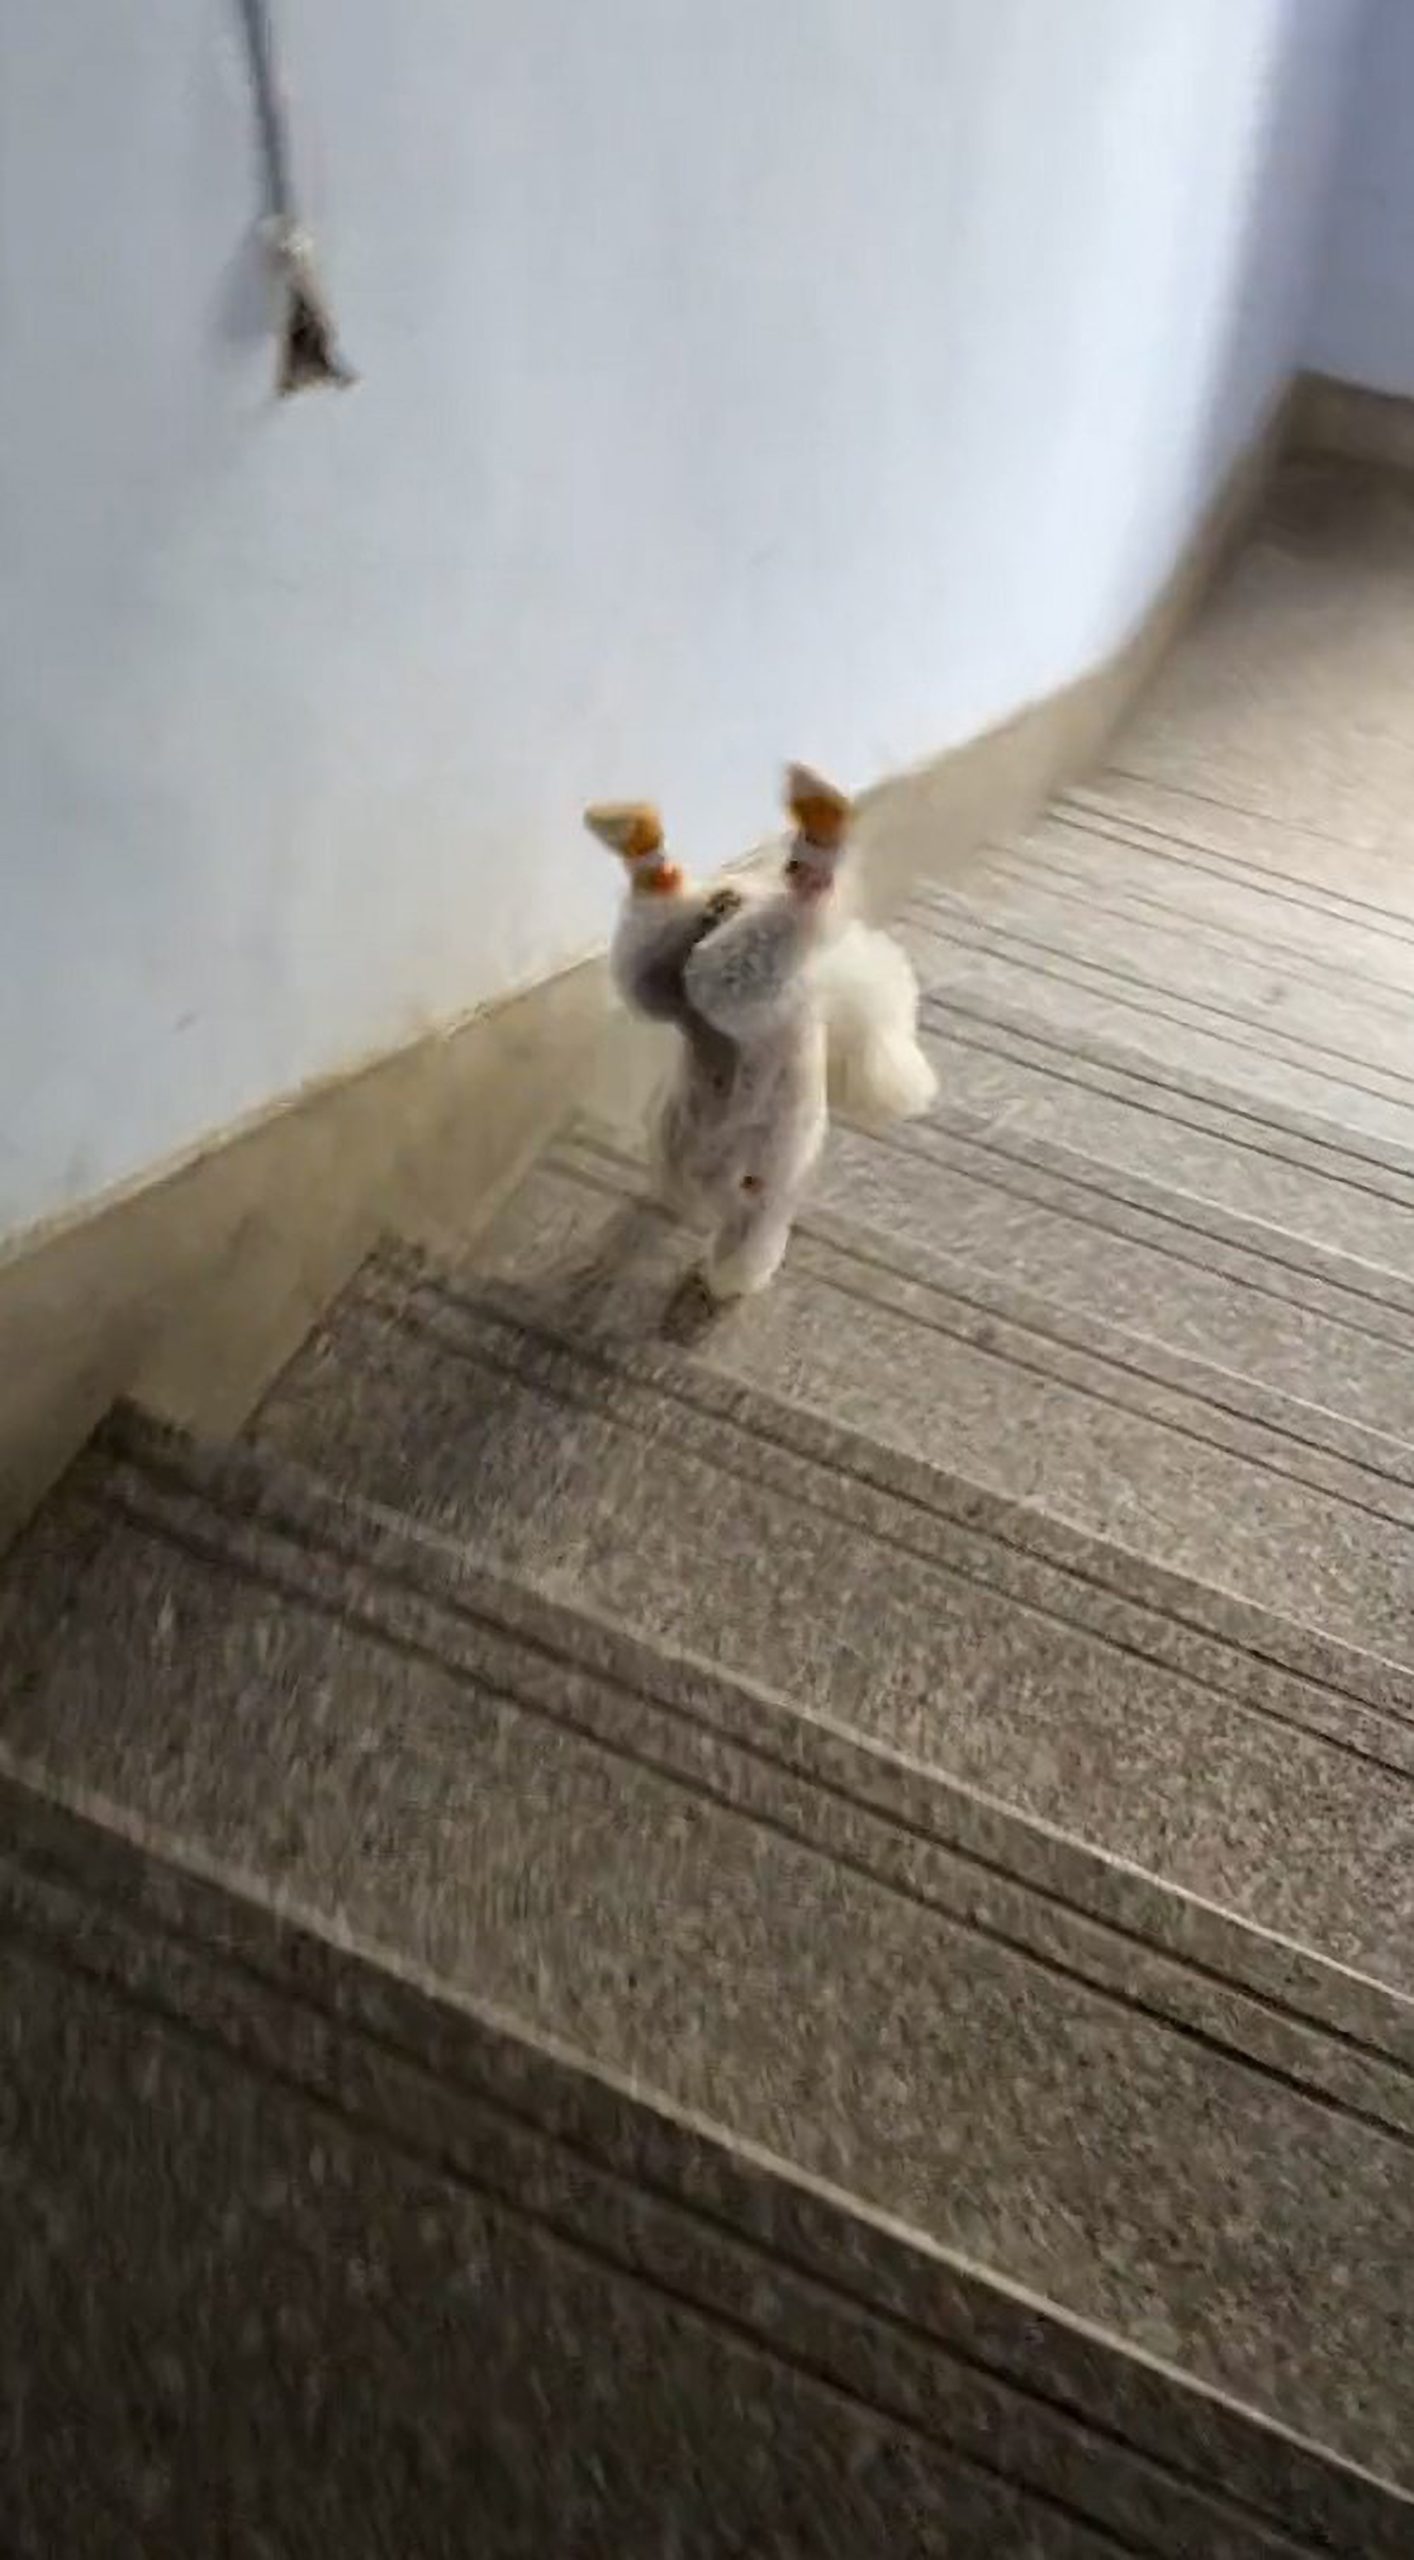 Read more about the article LEGGING IT: Toy Poodle Eager For A Walk Goes Down Stairs On Two Legs